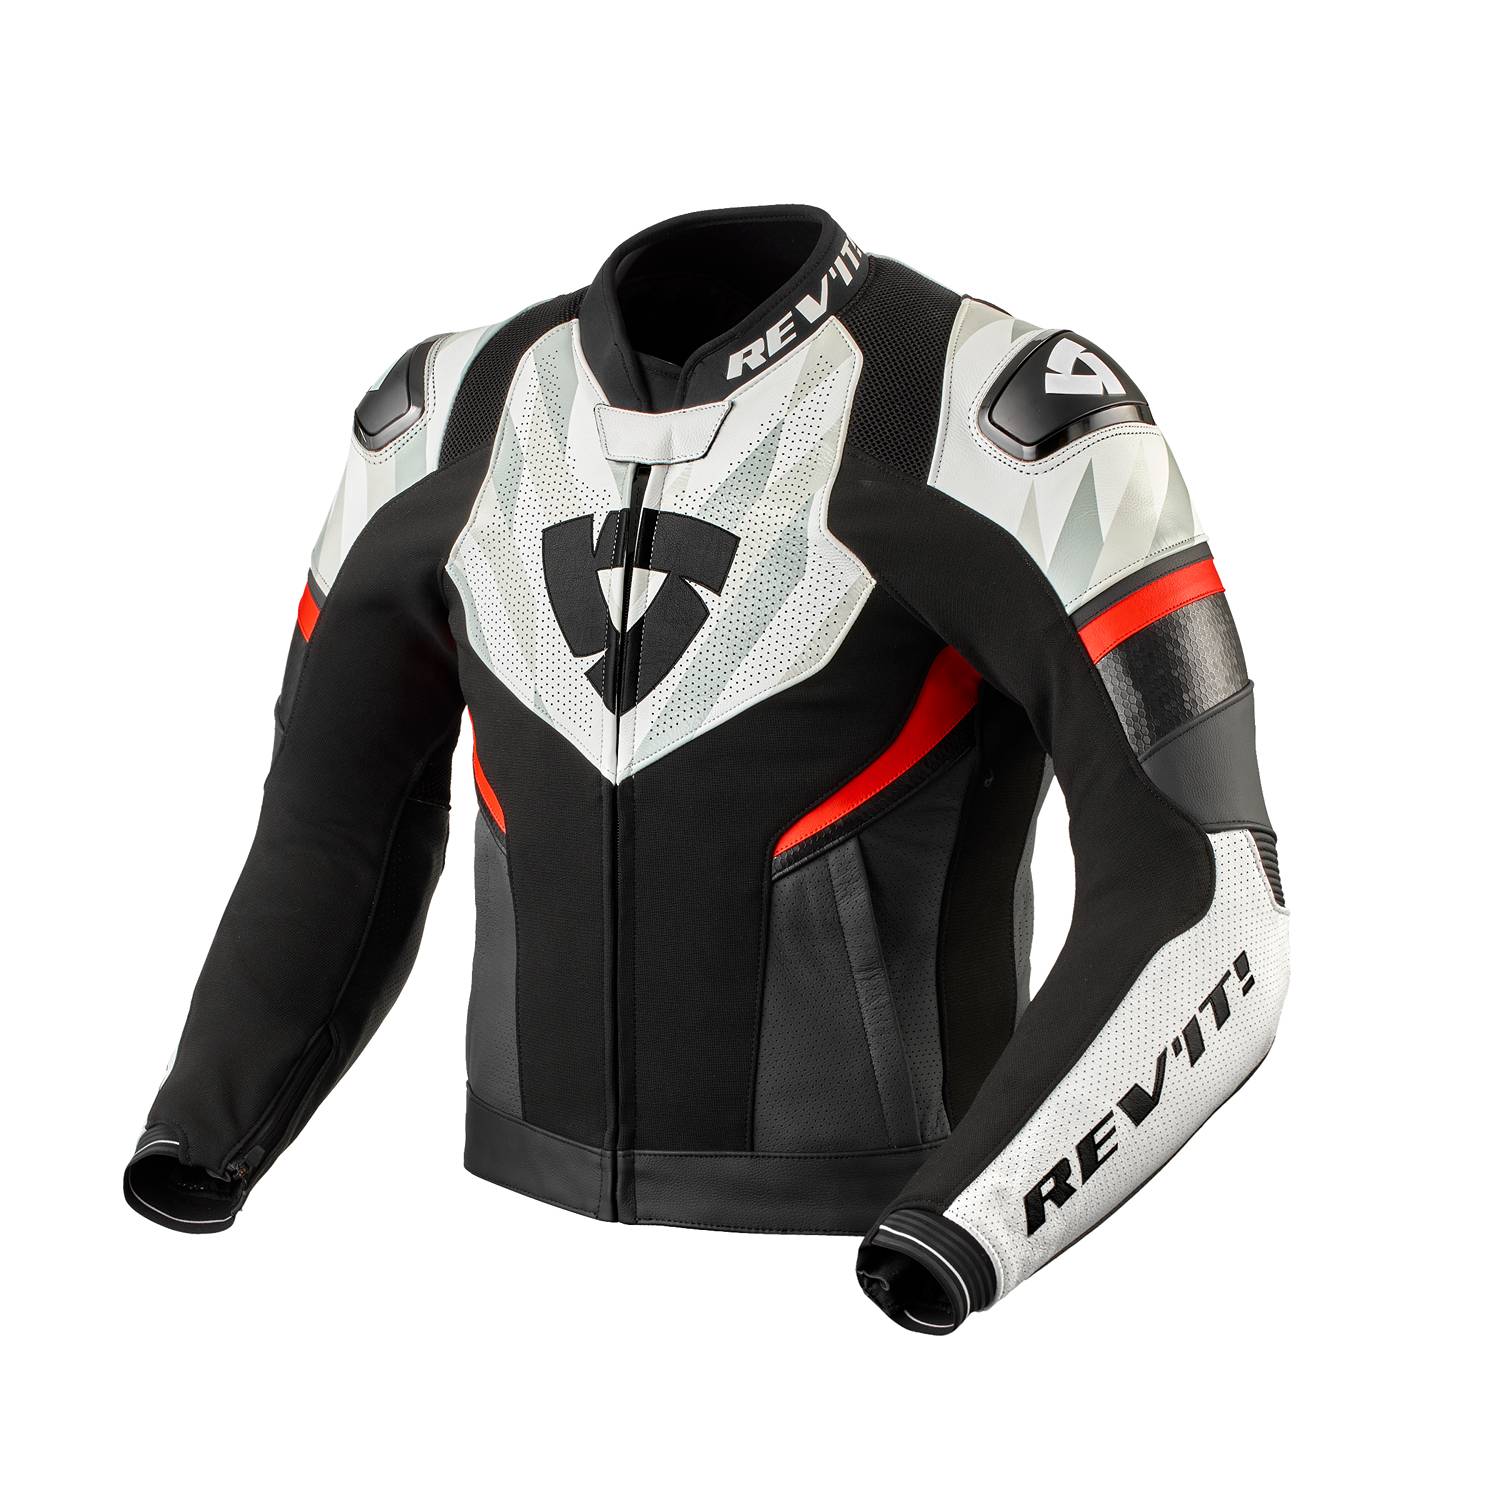 Image of REV'IT! Hyperspeed 2 Air Jacket Black White Size 50 ID 8700001358484